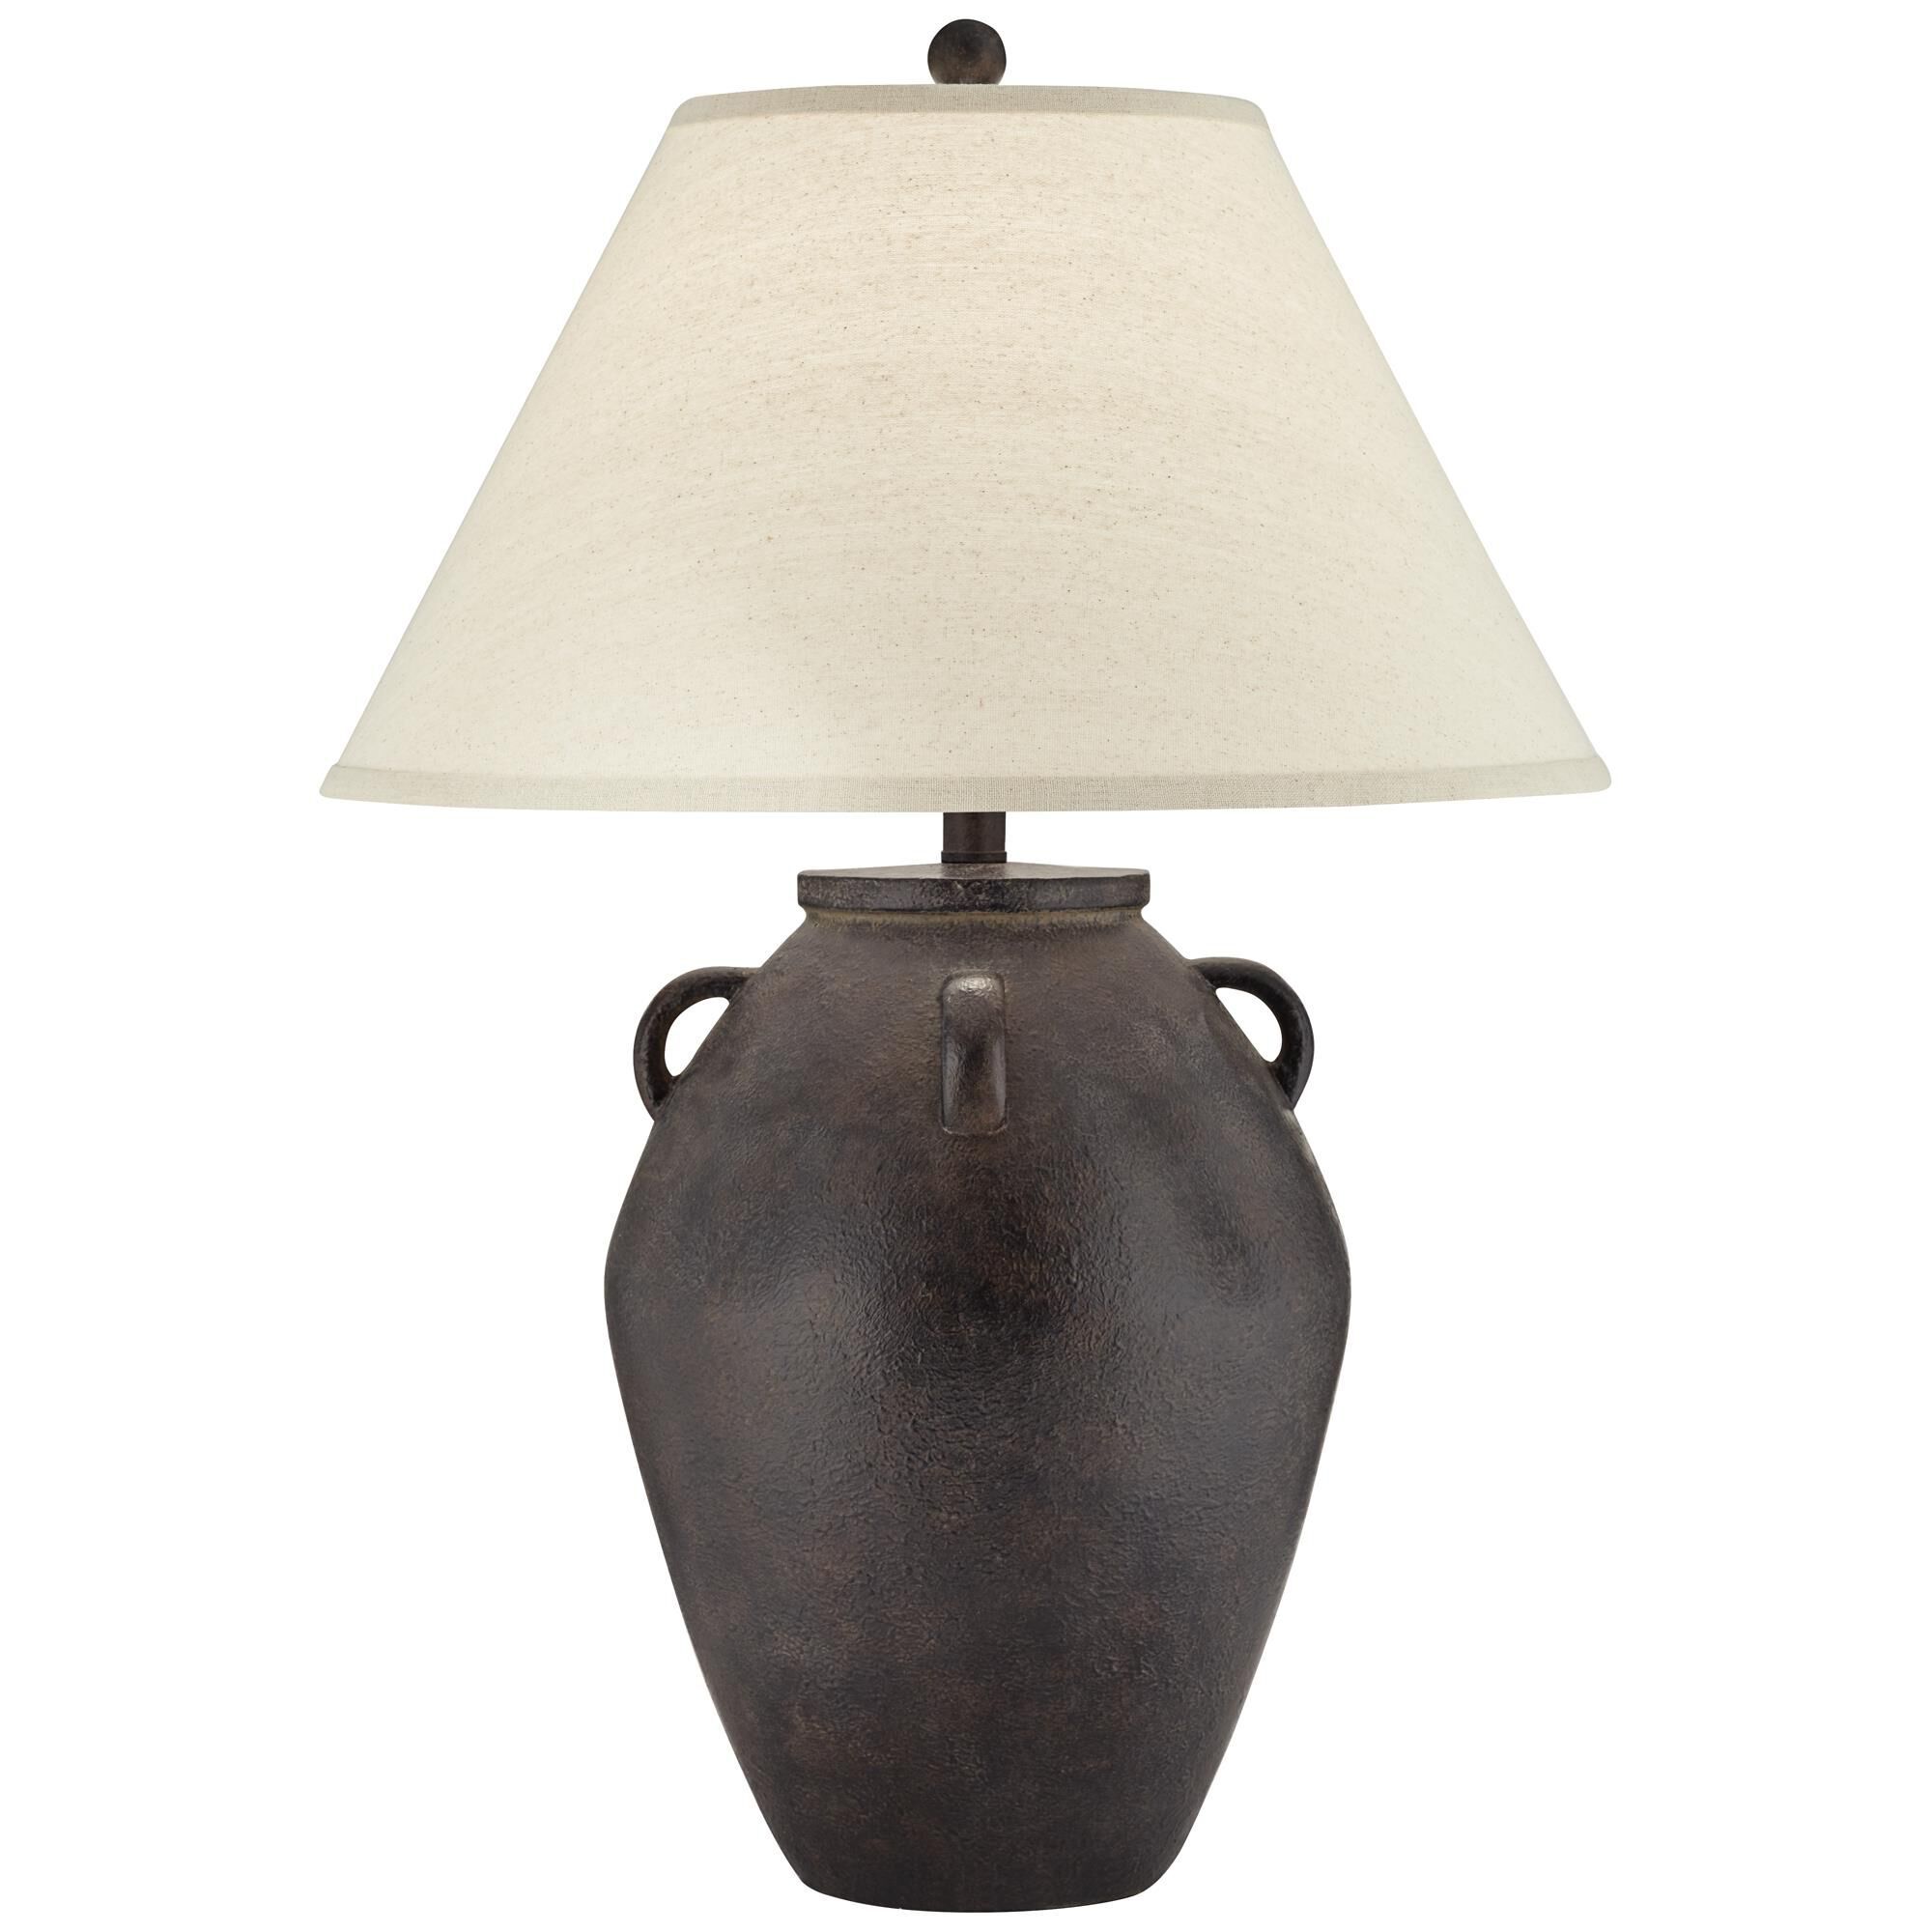 Ria 28 Inch Table Lamp by Pacific Coast Lighting | 1800 Lighting